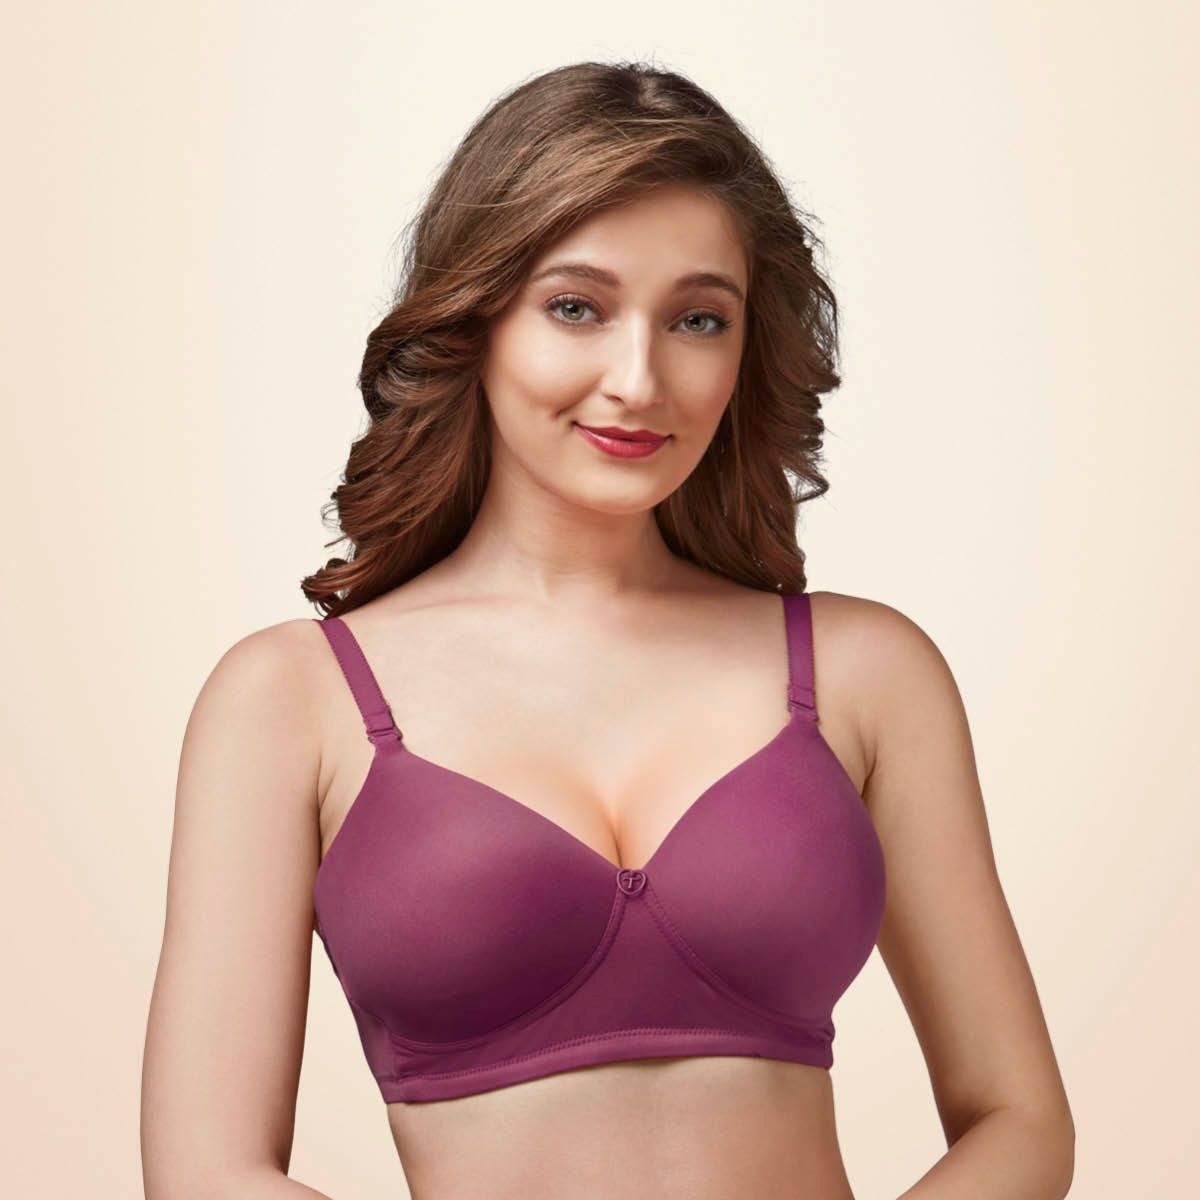 Buy Trylo Touche Woman Soft Padded Full Cup Bra - Orchid Online